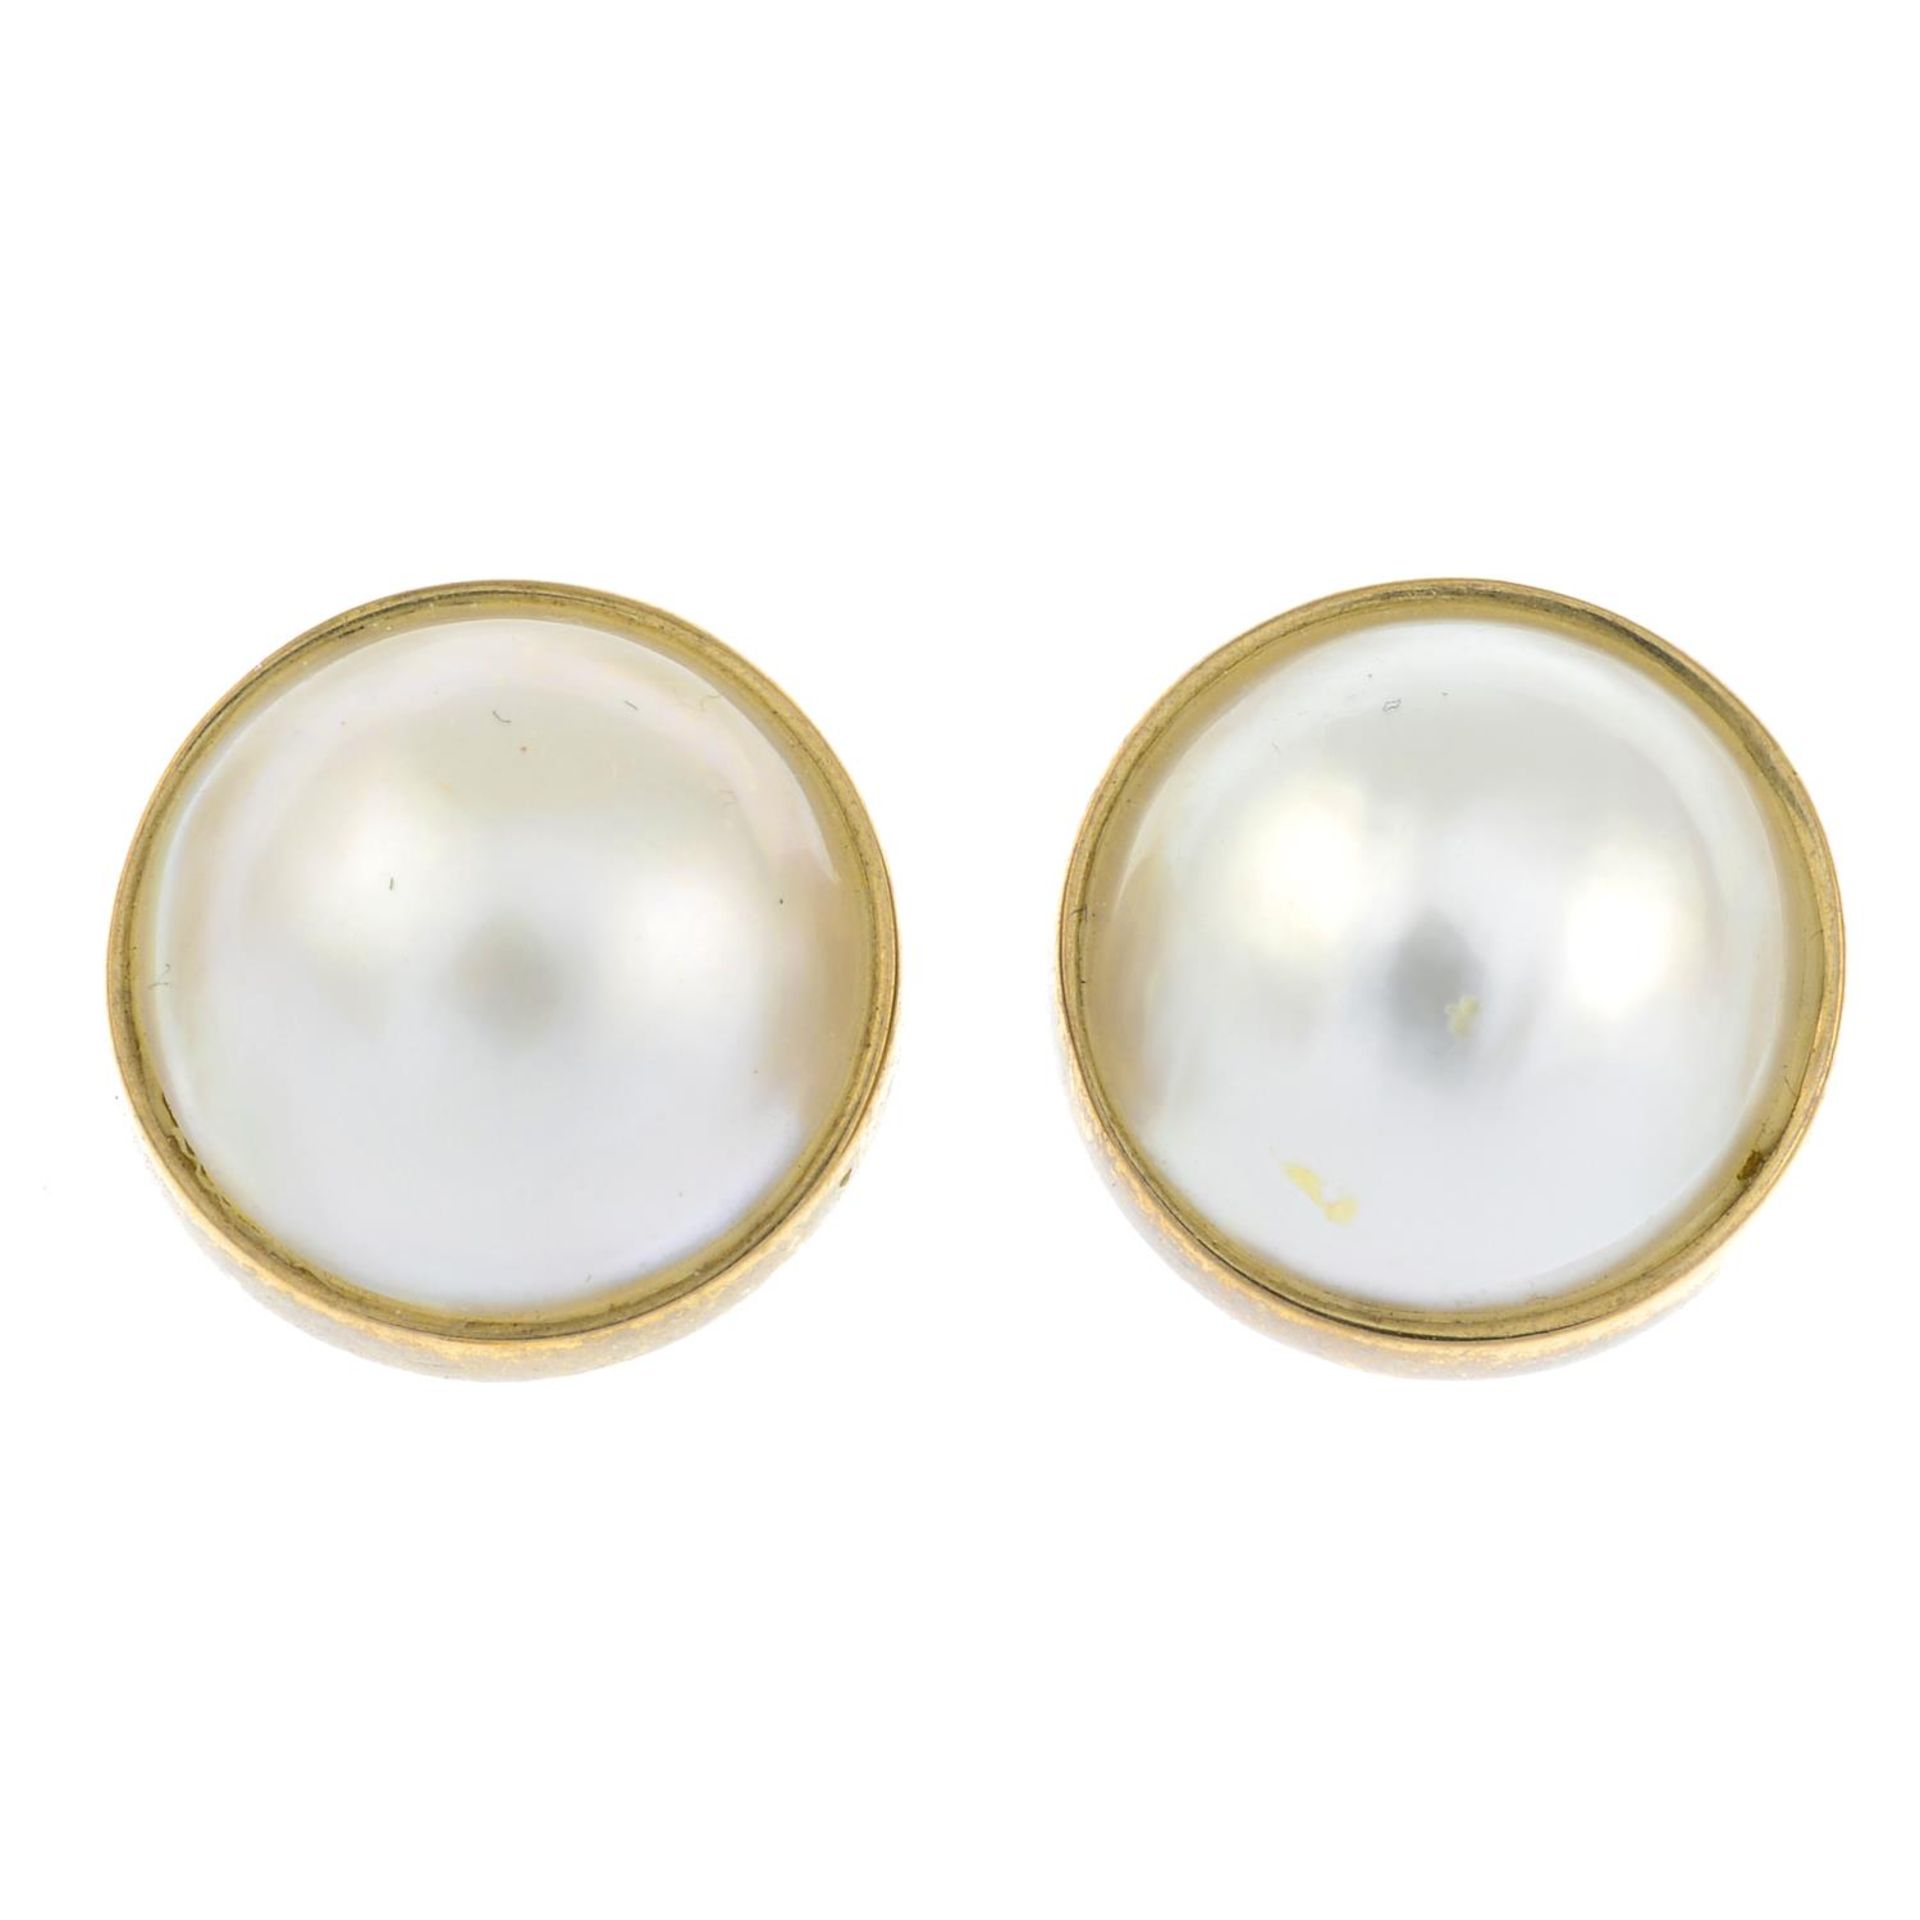 A pair of 9ct gold cultured mabe pearl stud earrings.Hallmarks for Sheffield.Length 1.3cms.